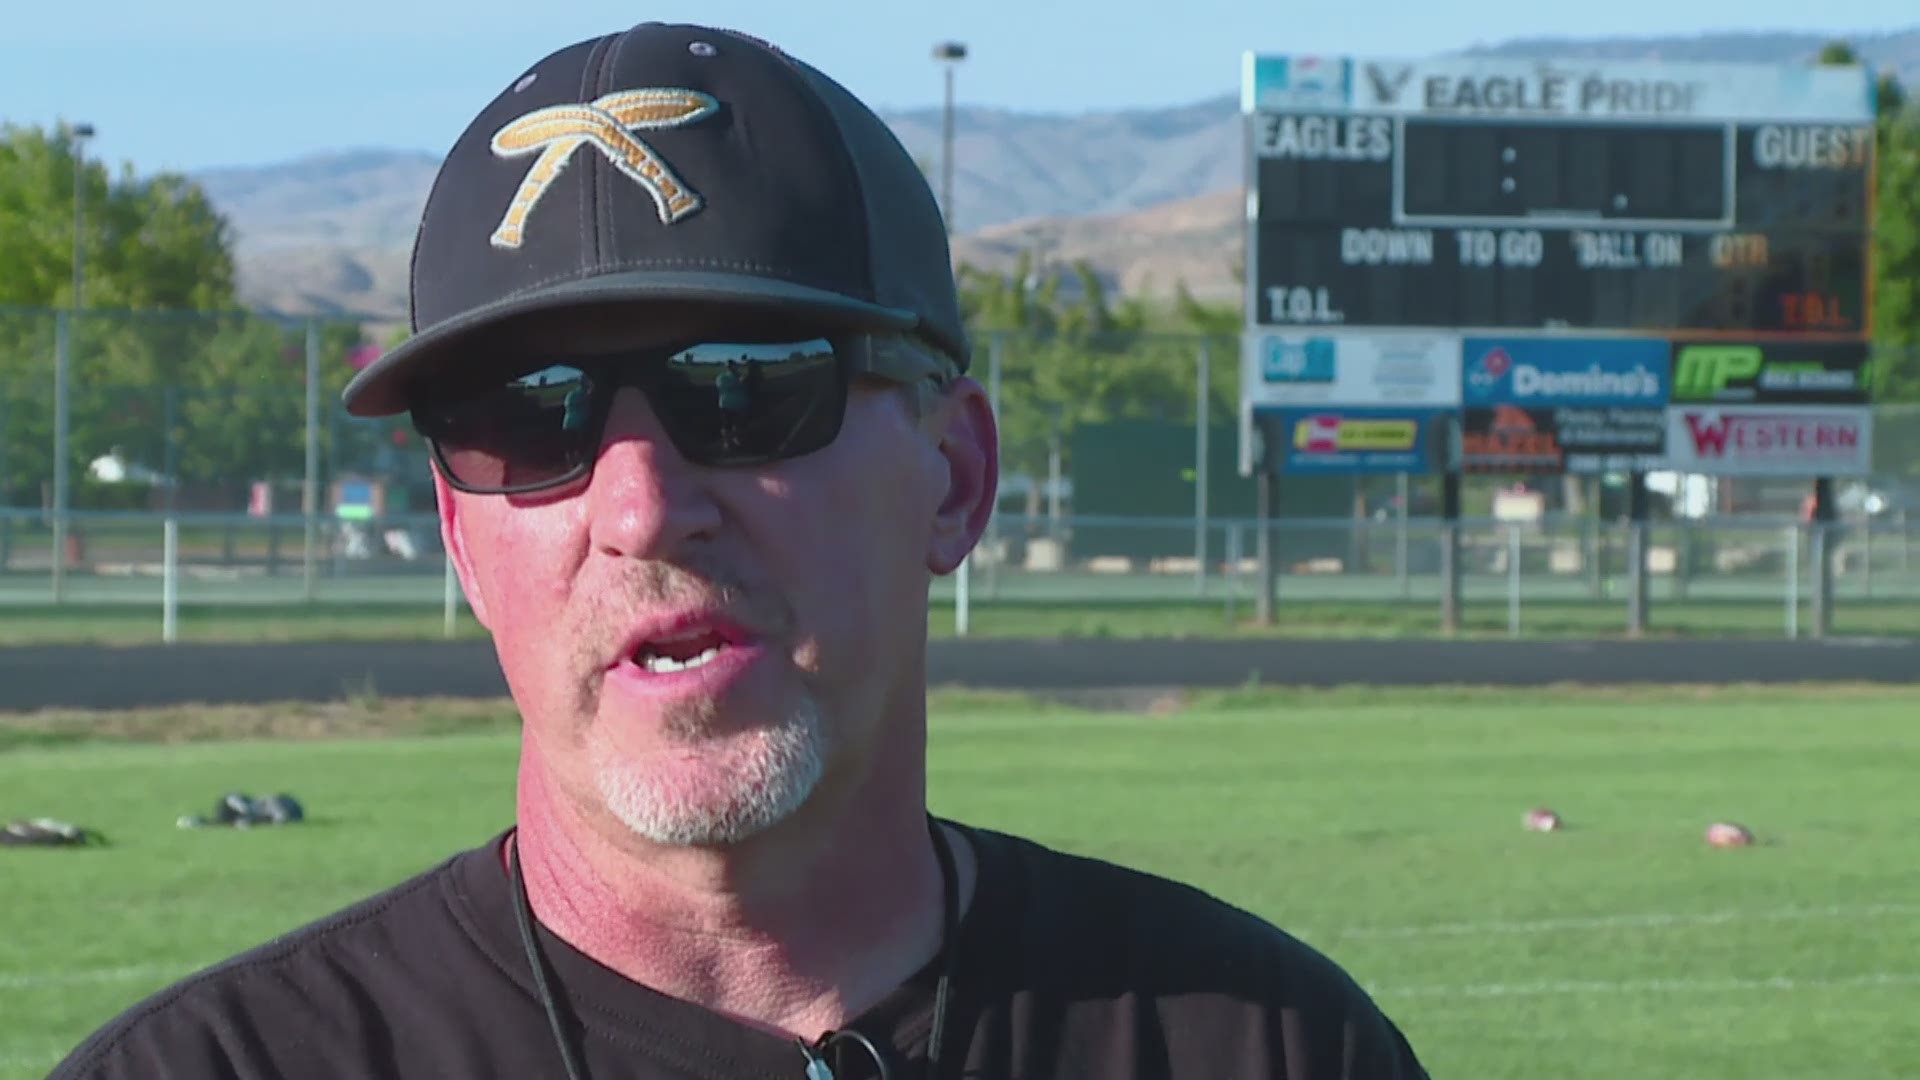 Now in his 22nd year as a head coach, Capital's Todd Simis previews his 2019 squad.